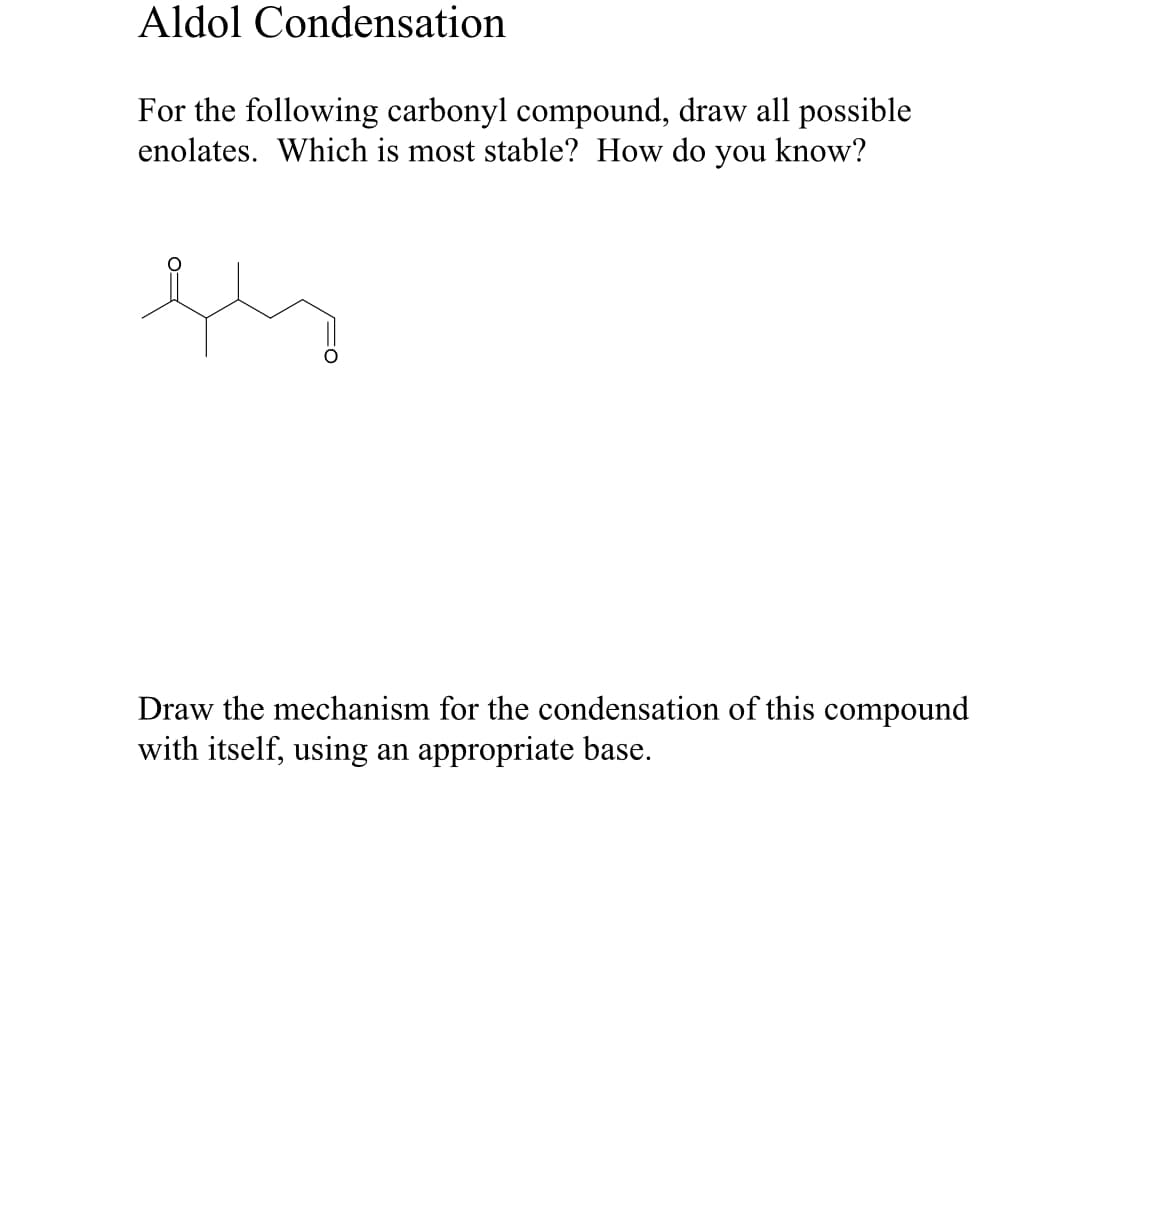 Aldol Condensation
For the following carbonyl compound, draw all possible
enolates. Which is most stable? How do you know?
Draw the mechanism for the condensation of this compound
with itself, using an appropriate base.